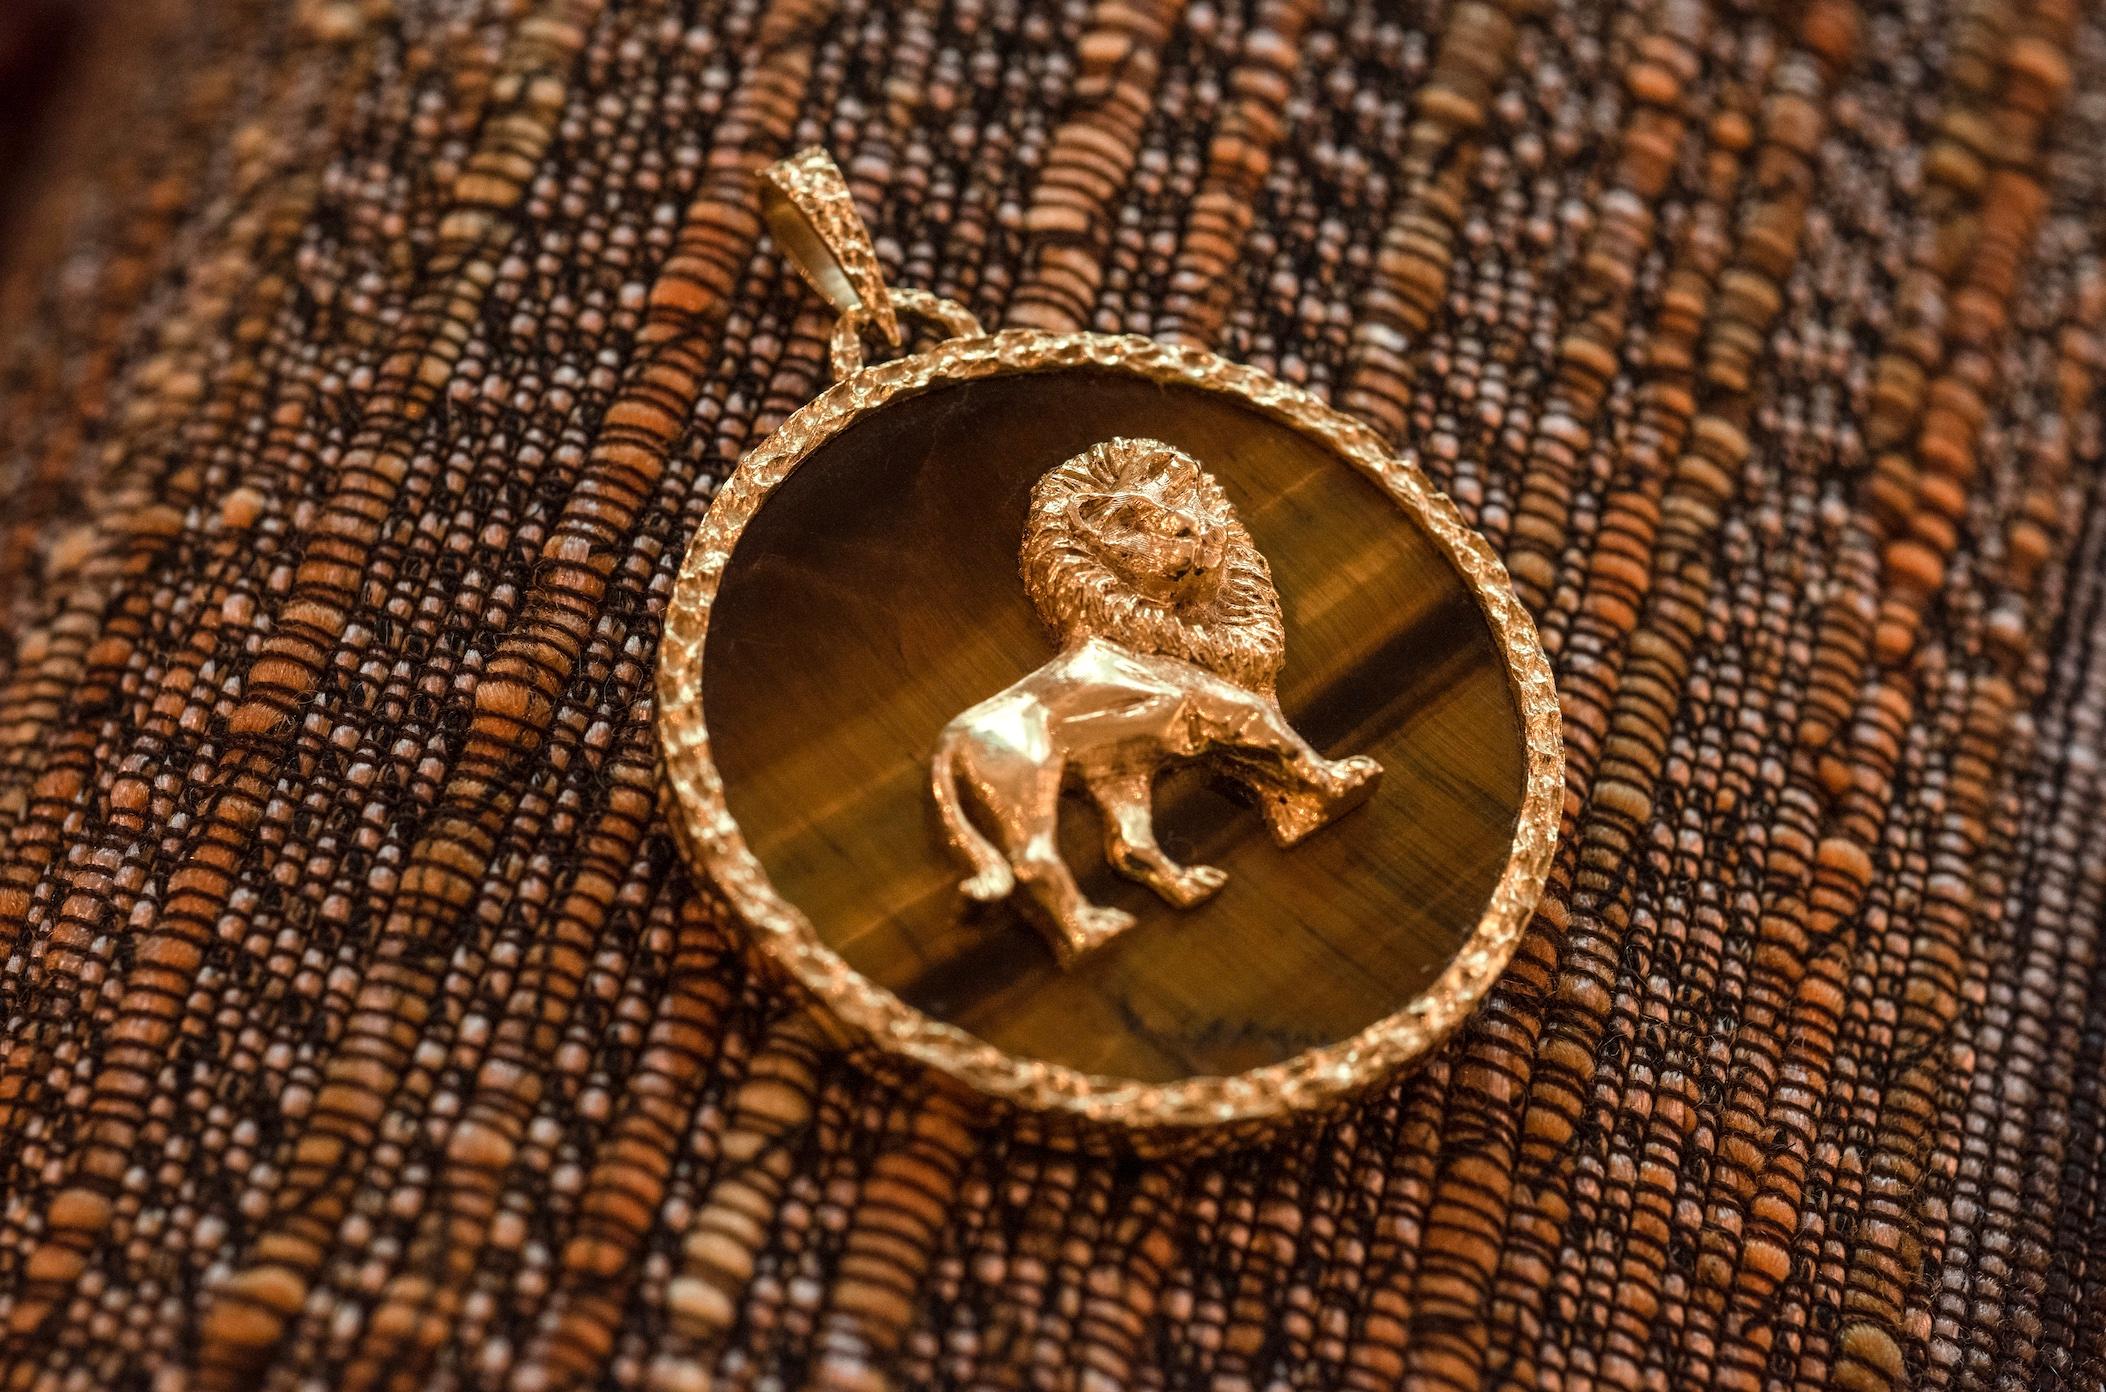 An original tiger's eye and 18 karat gold Leo zodiac astrology pendant  of medium size, by Carl Bucherer,  c. 1970. Stamped ' CB', 750.  

At the center of this Carl Bucherer pendant is a tiger eye gemstone, known for its distinct golden-brown color